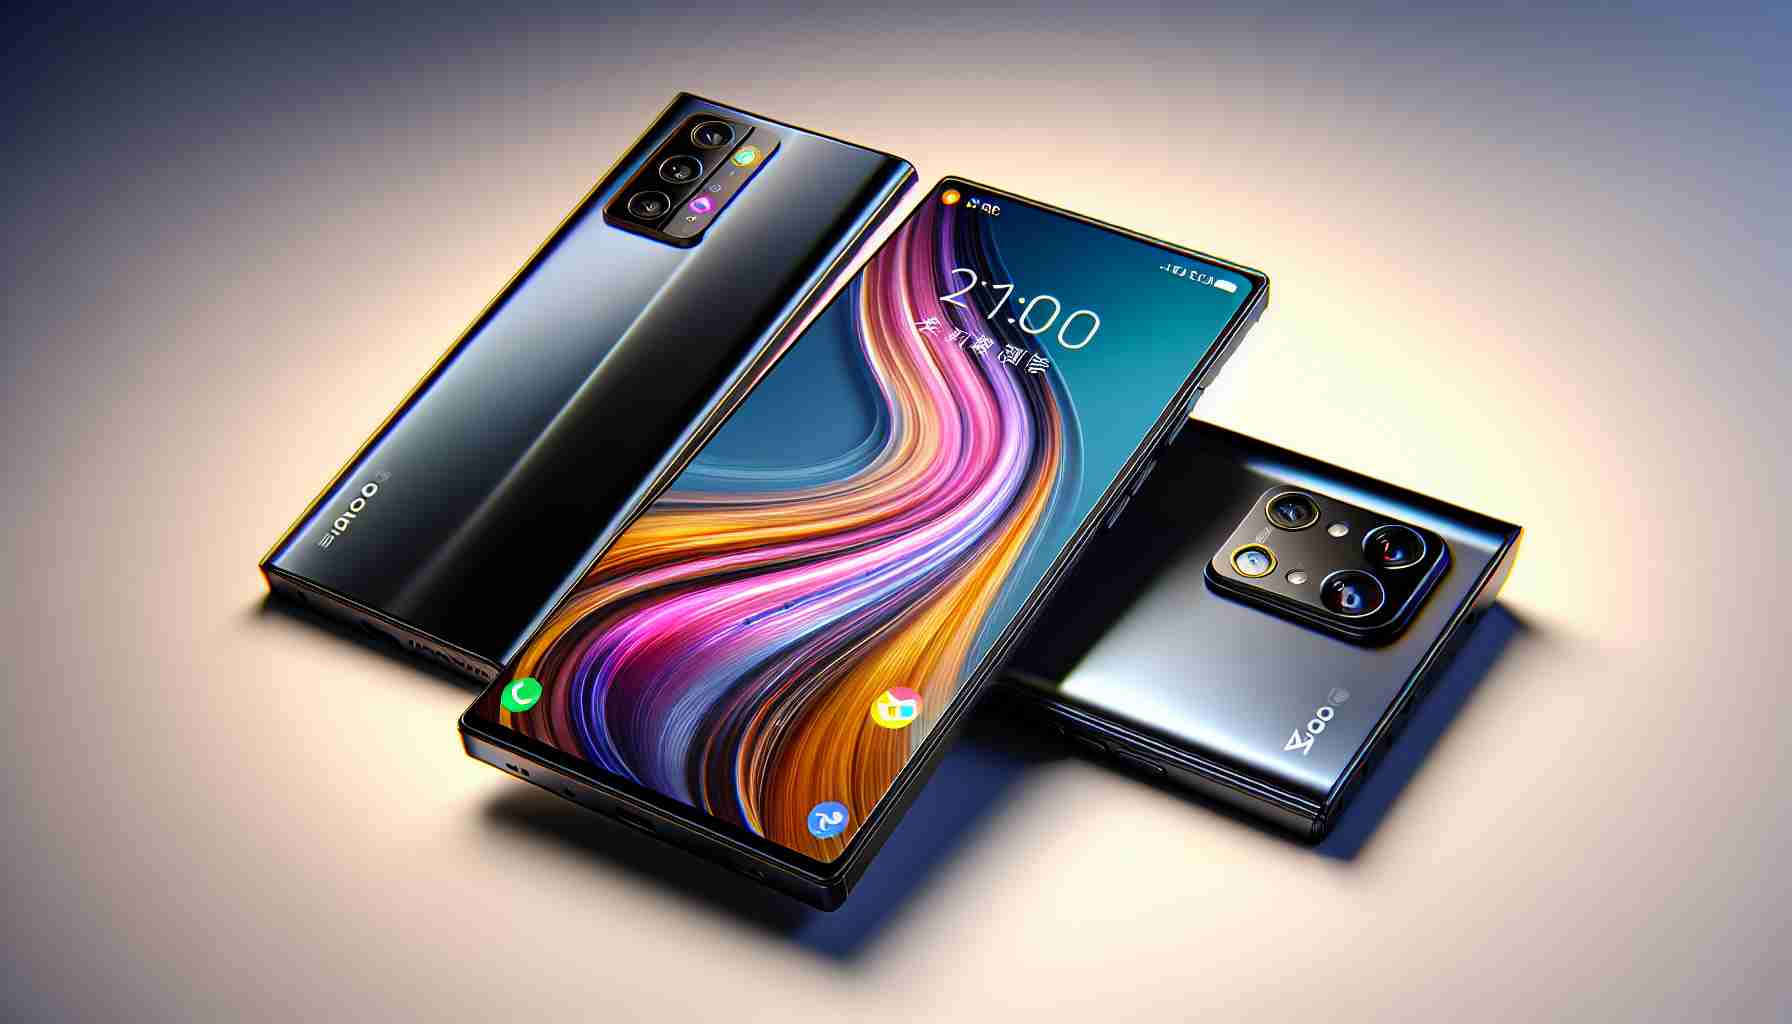 iQOO Z9x 5G: A Power-Packed Smartphone at Half the Cost of an iPhone 11